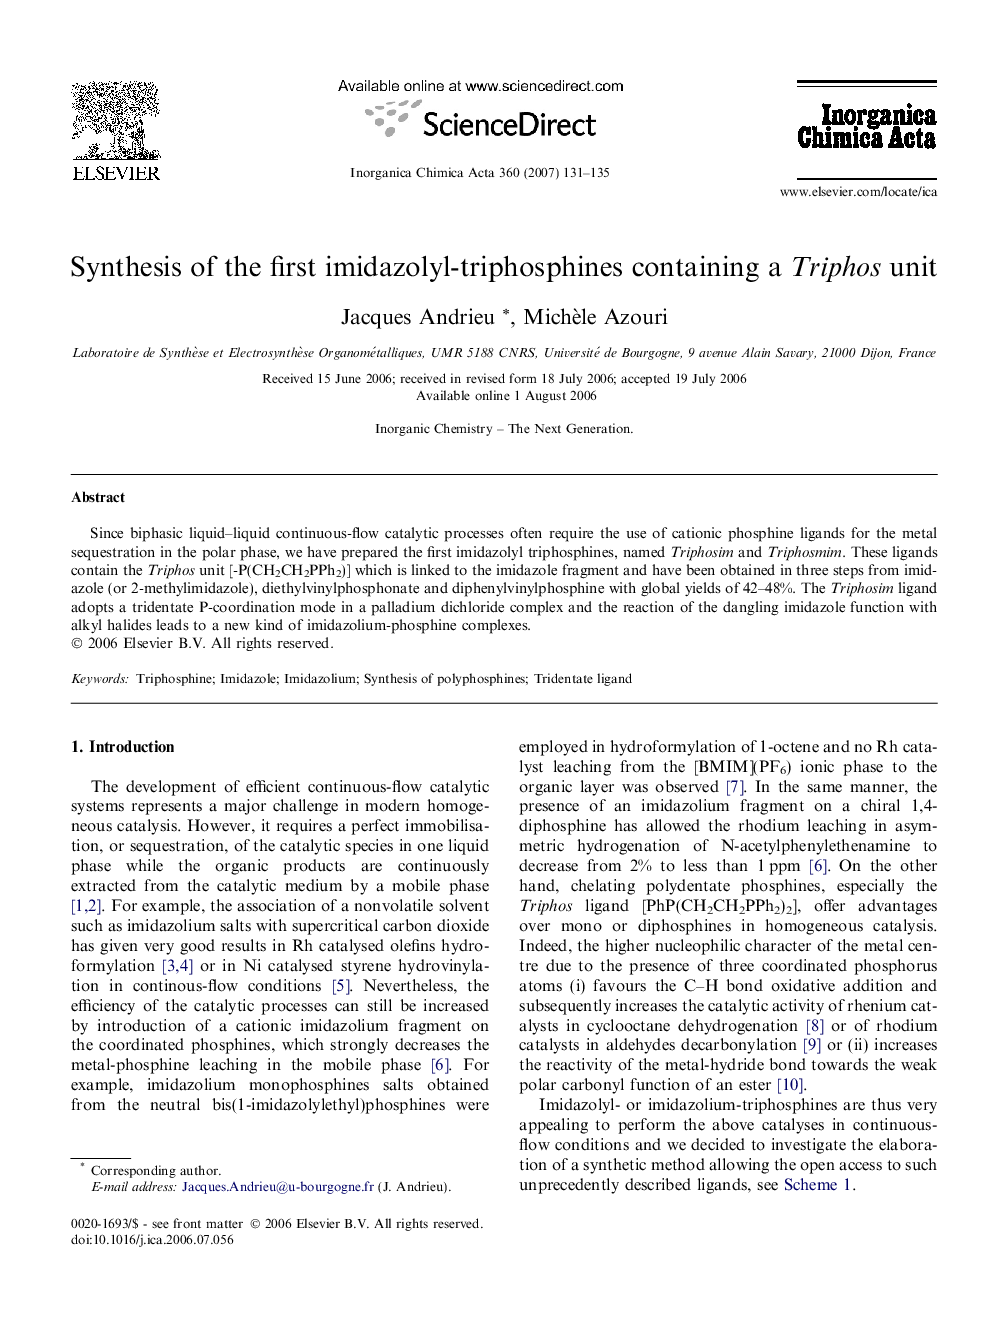 Synthesis of the first imidazolyl-triphosphines containing a Triphos unit